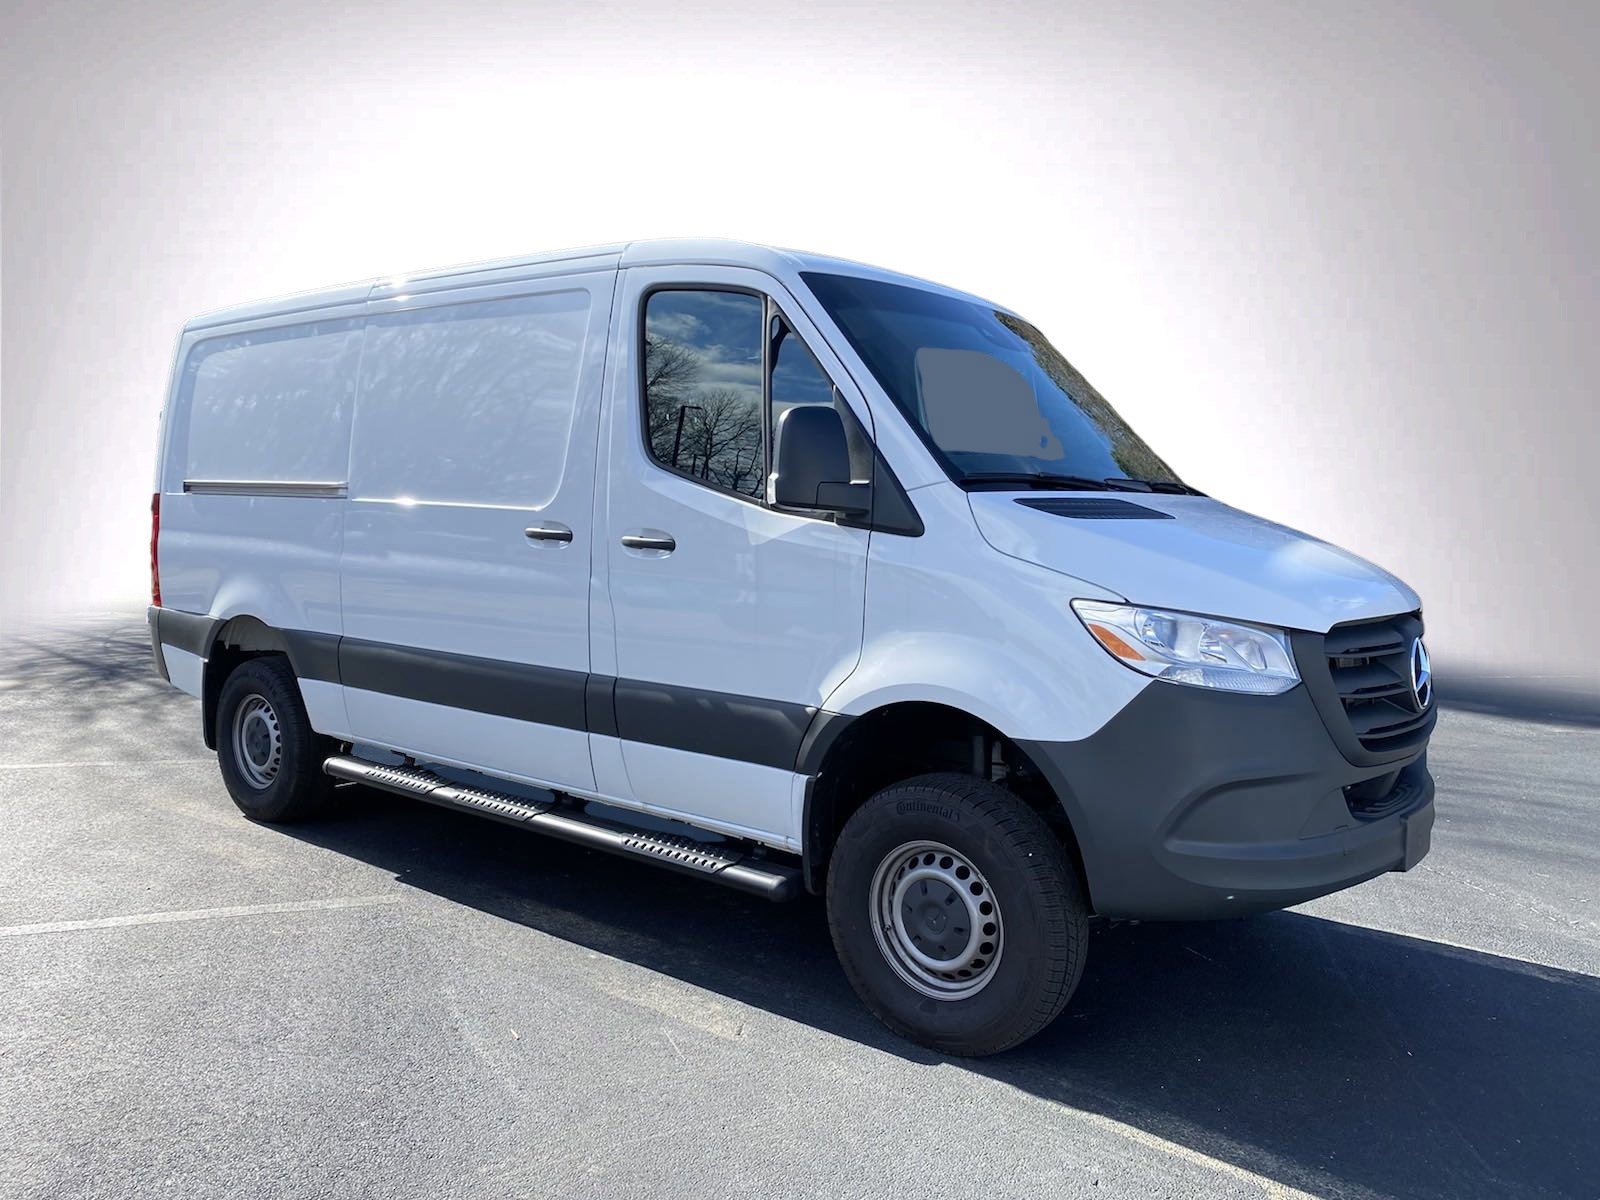 Pre-Owned 2022 Mercedes-Benz Sprinter Cargo Van 2500 Standard Roof V6 144  4WD Van in Cary #Q62441A | Hendrick Dodge Cary